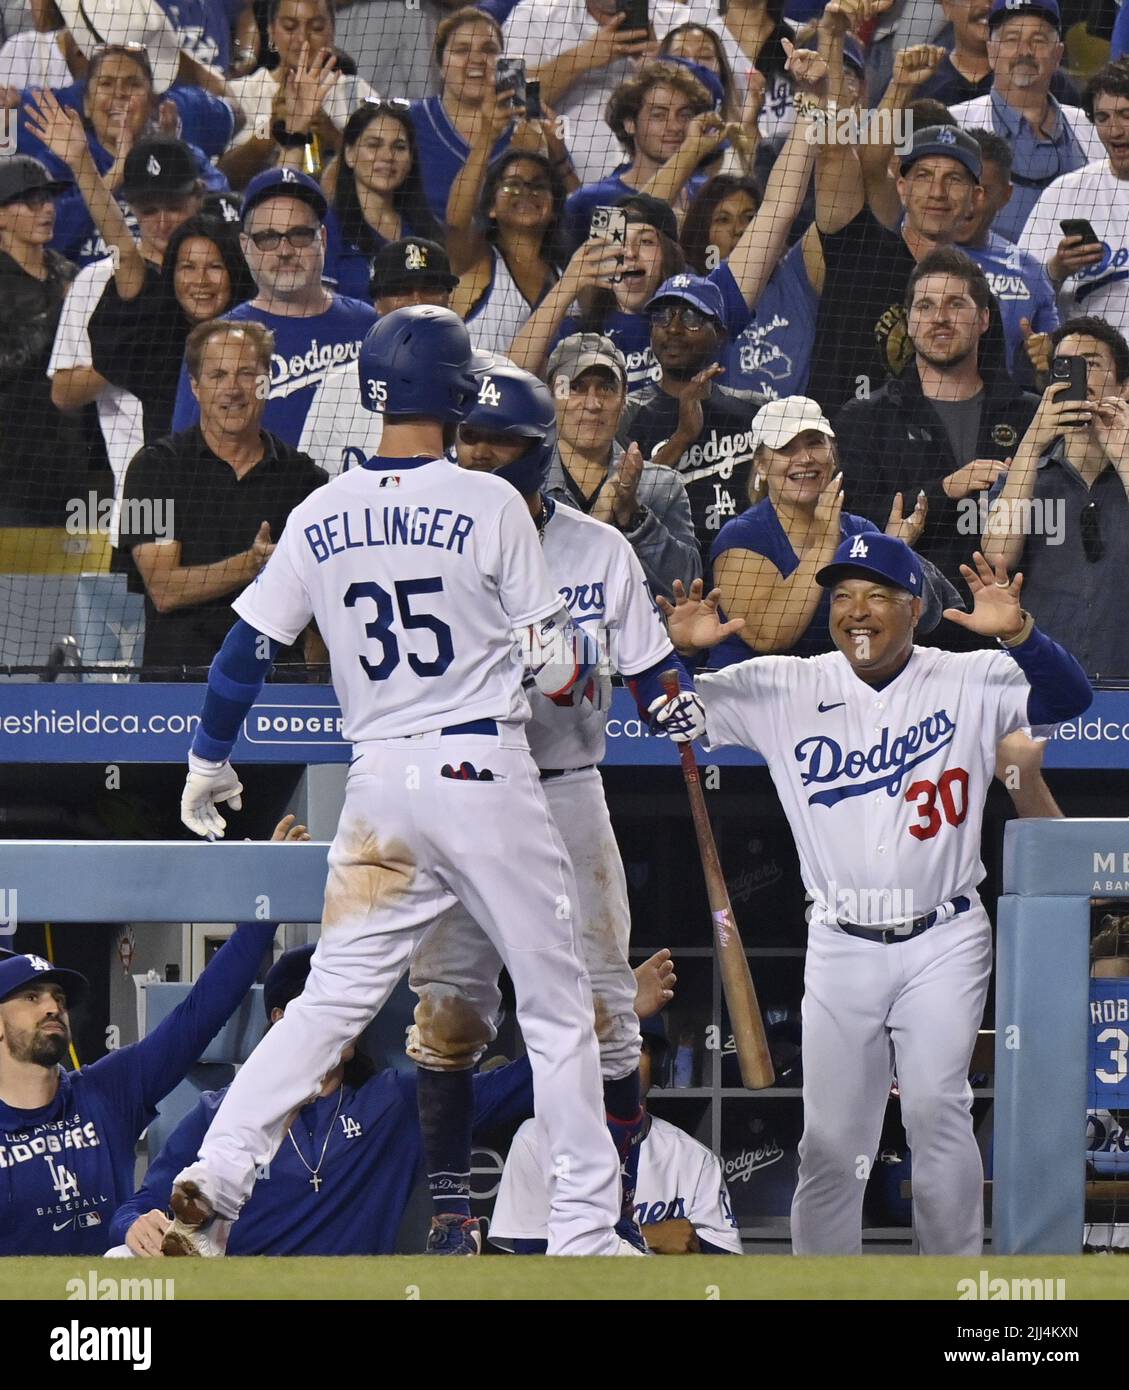 After Fan Is Hit by a Cody Bellinger Foul, Dodgers Say They Are